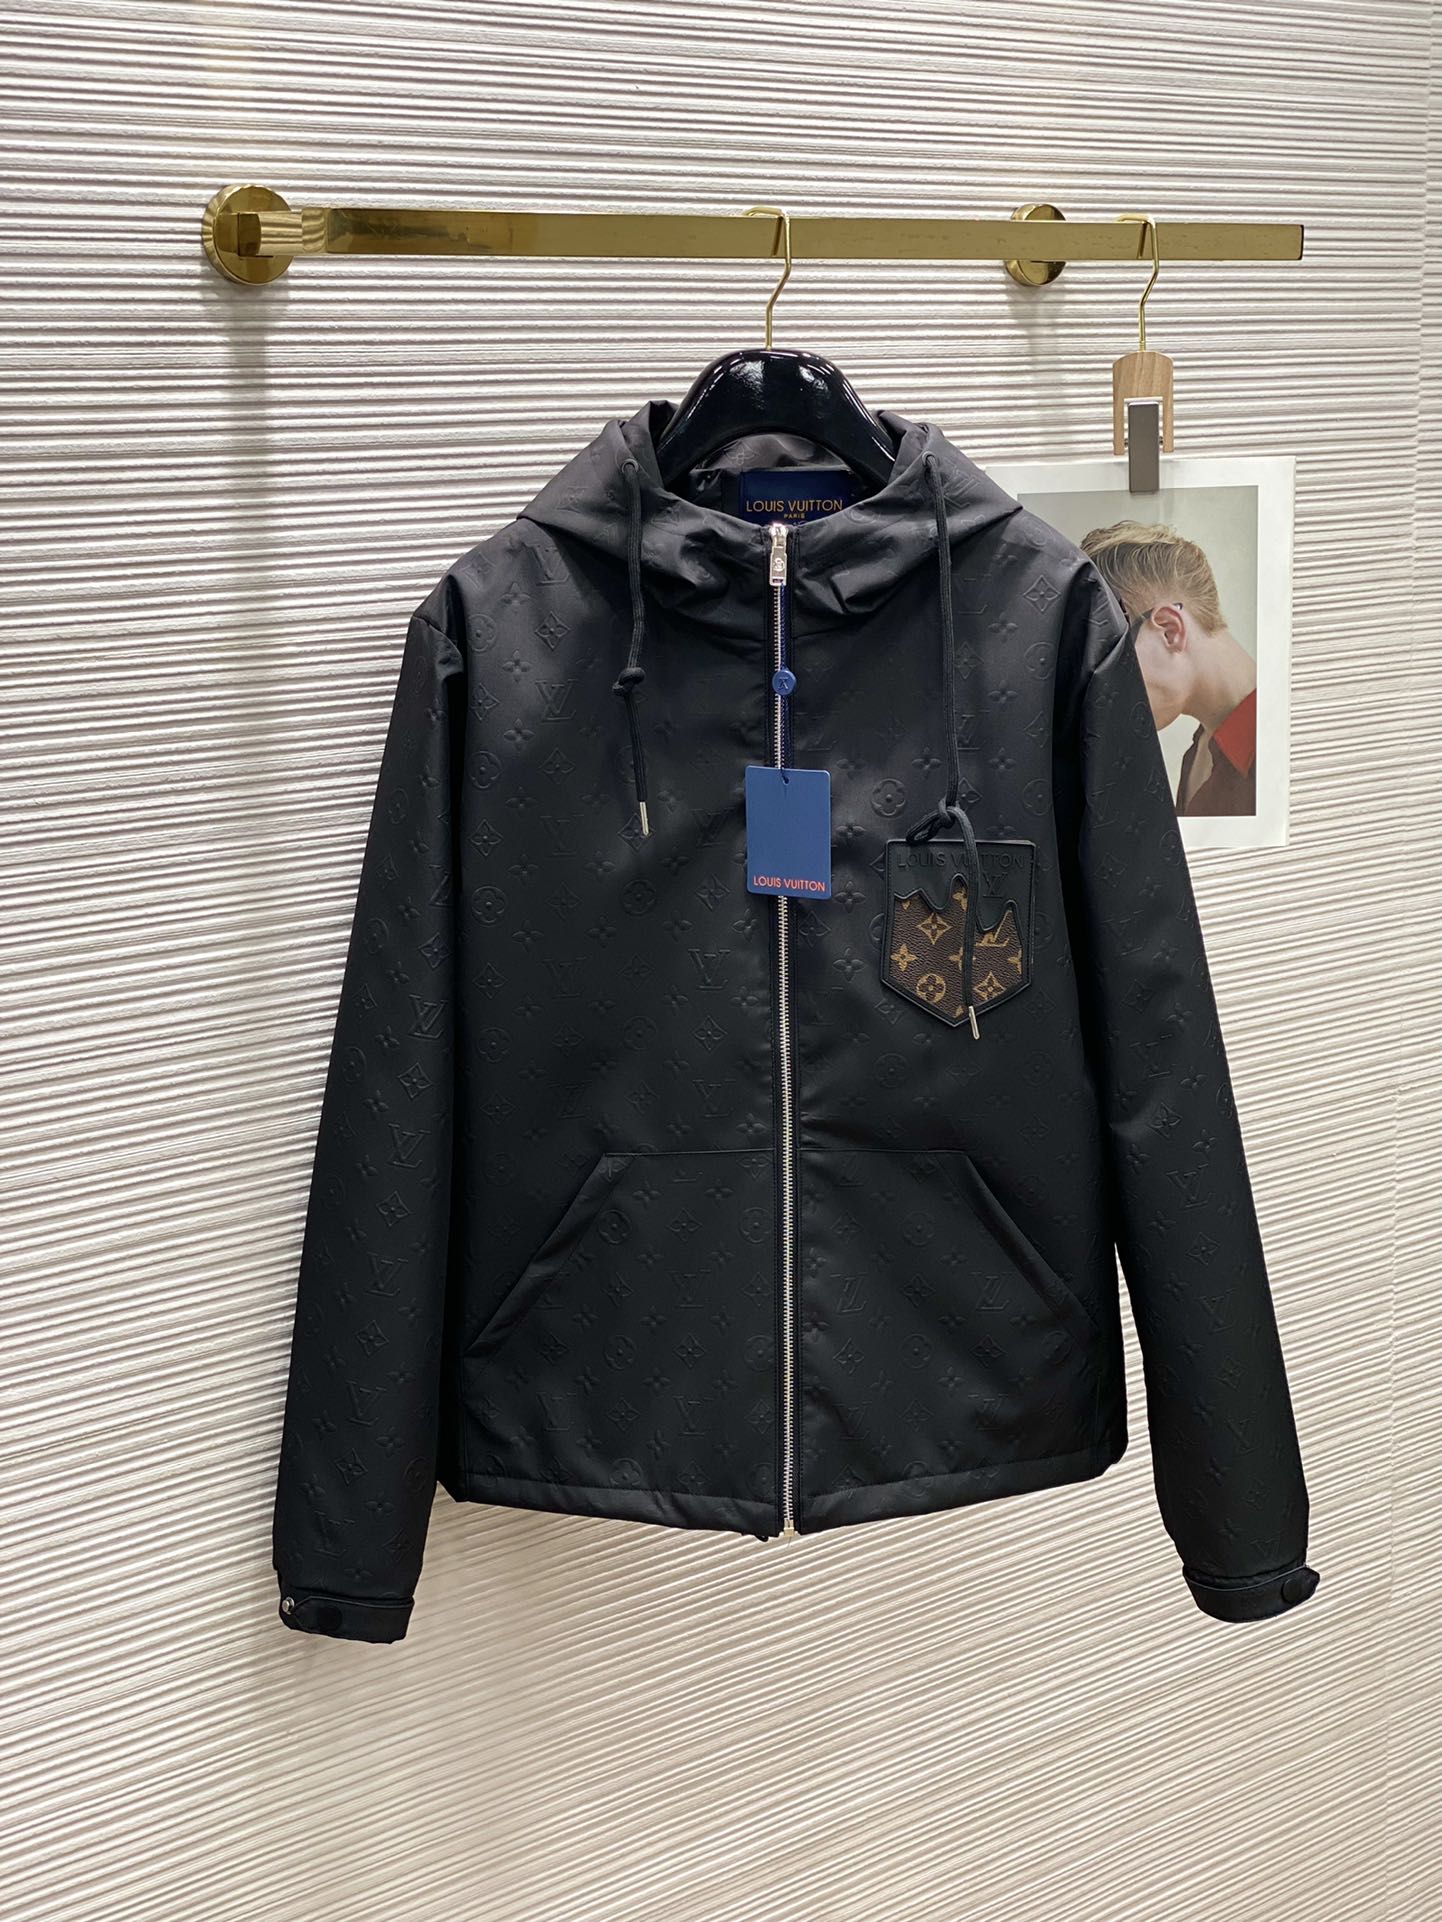 Louis Vuitton Clothing Coats & Jackets Embroidery Spring Collection Fashion Casual